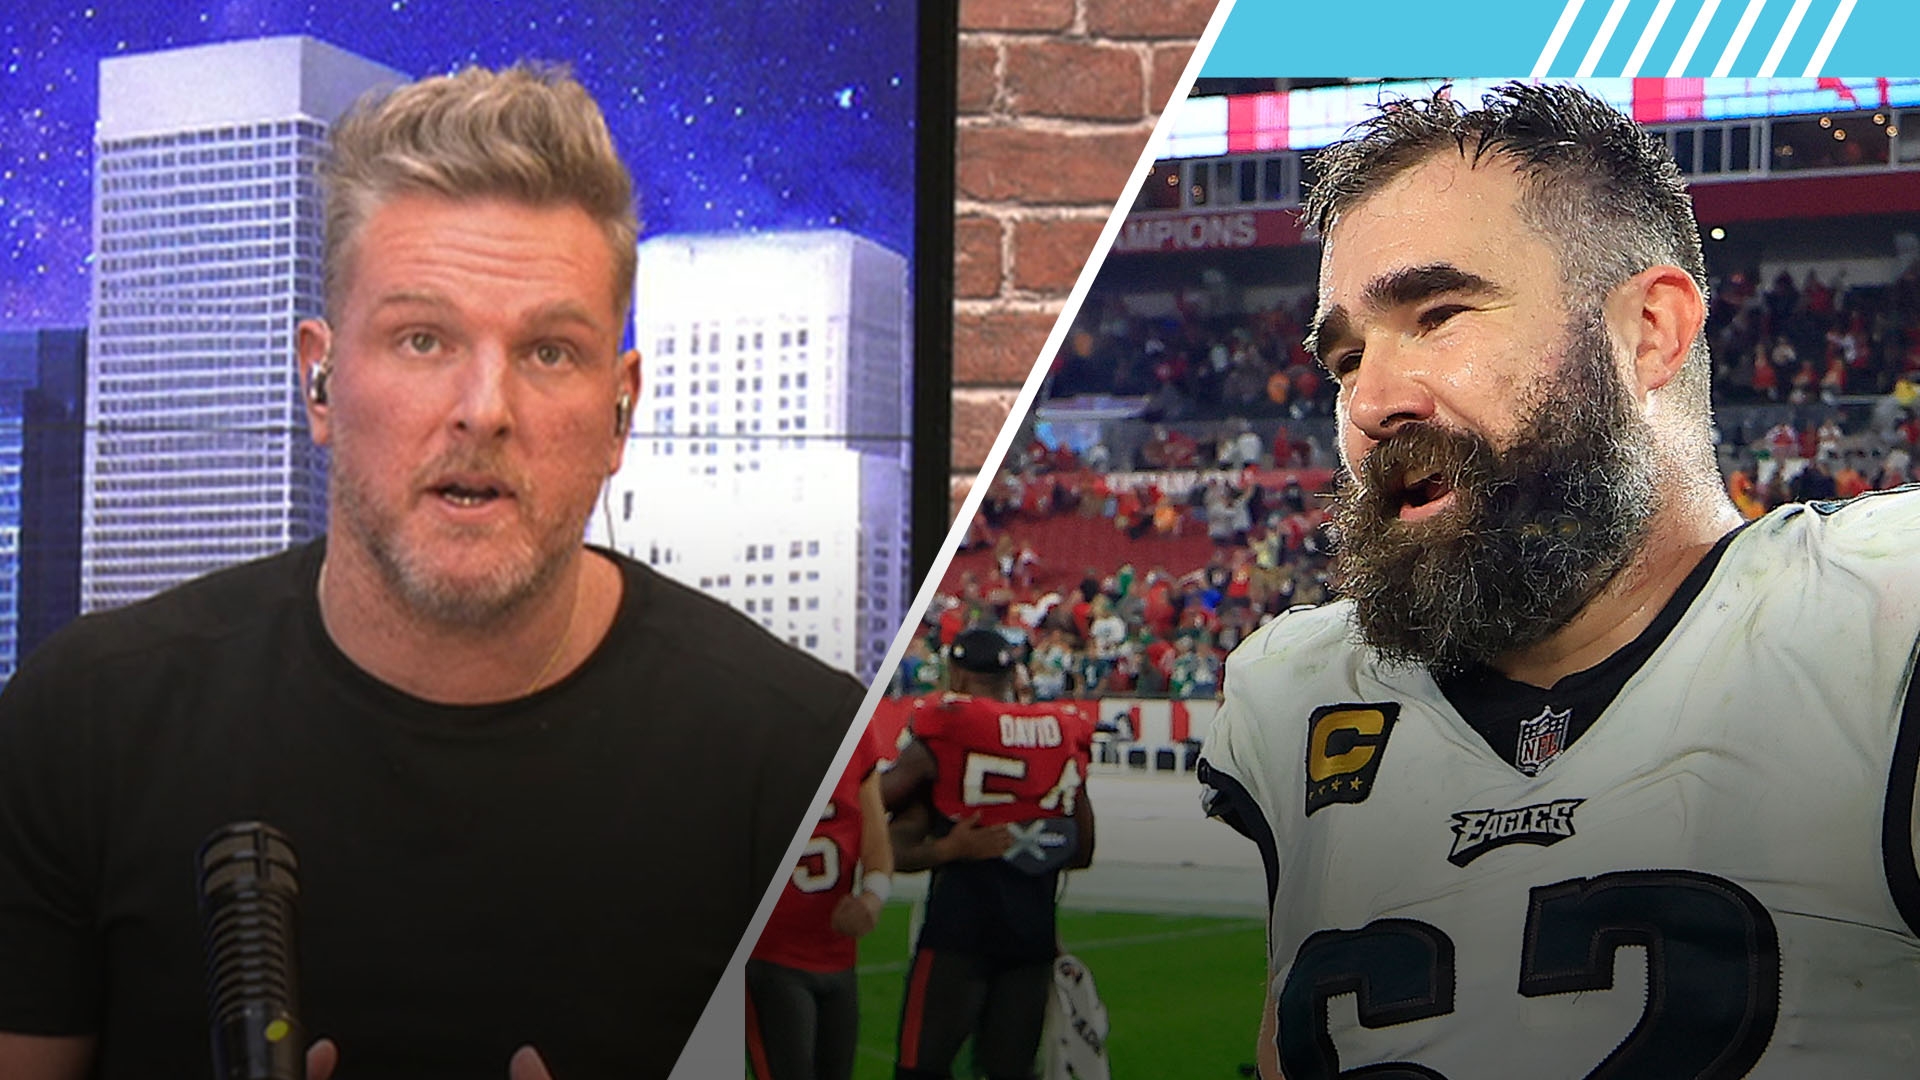 McAfee loves seeing Jason Kelce get praised after his retirement